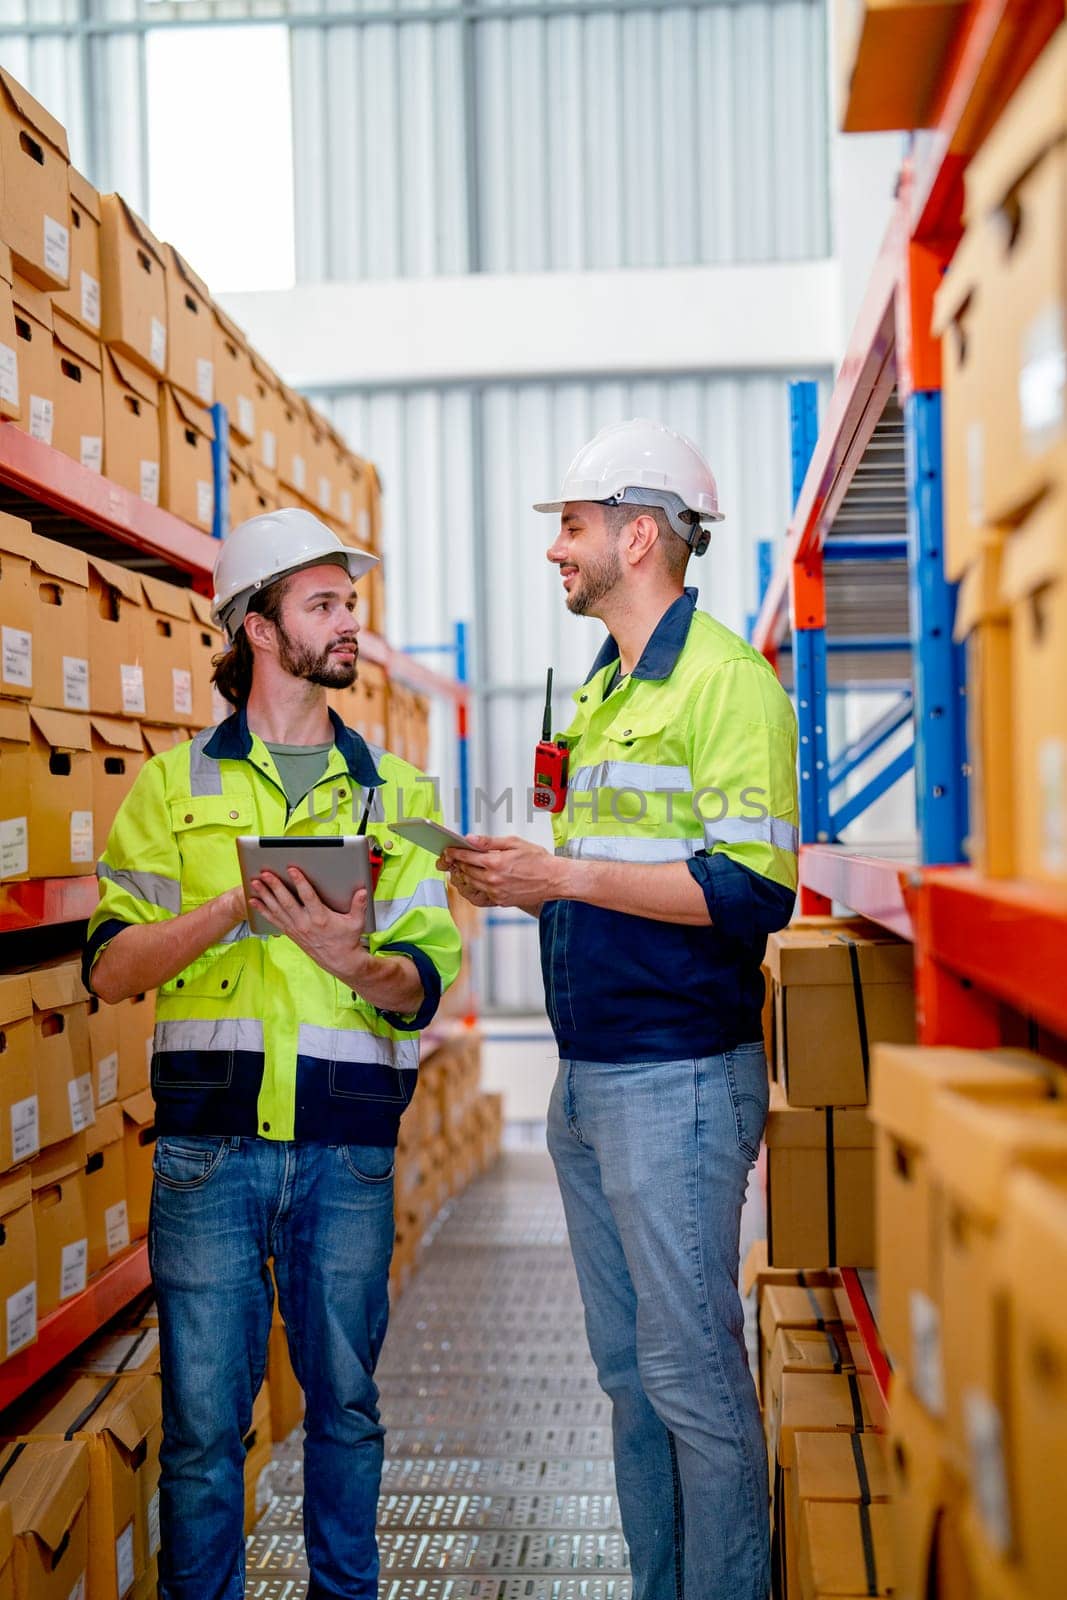 Two professional warehouse workers stand between shelves of products and discuss together about work in workplace area. The concept of good system support the worker for stock and shipment industry.